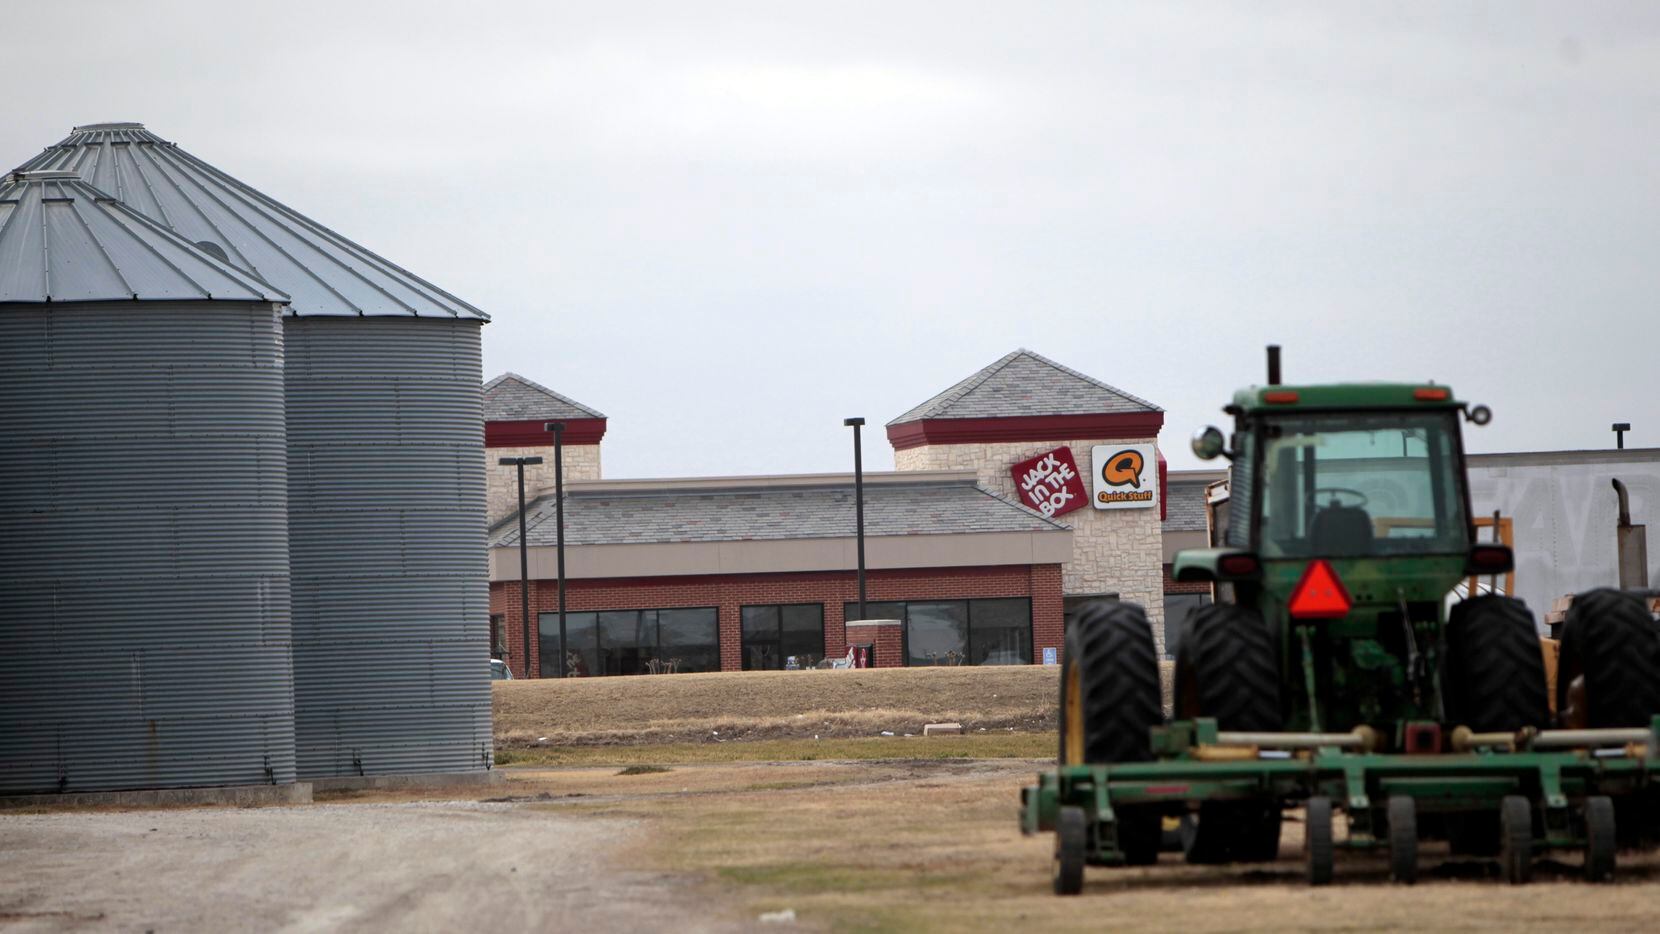 The Haggard family farm on the tollway is a reminder of Plano's agricultural past.